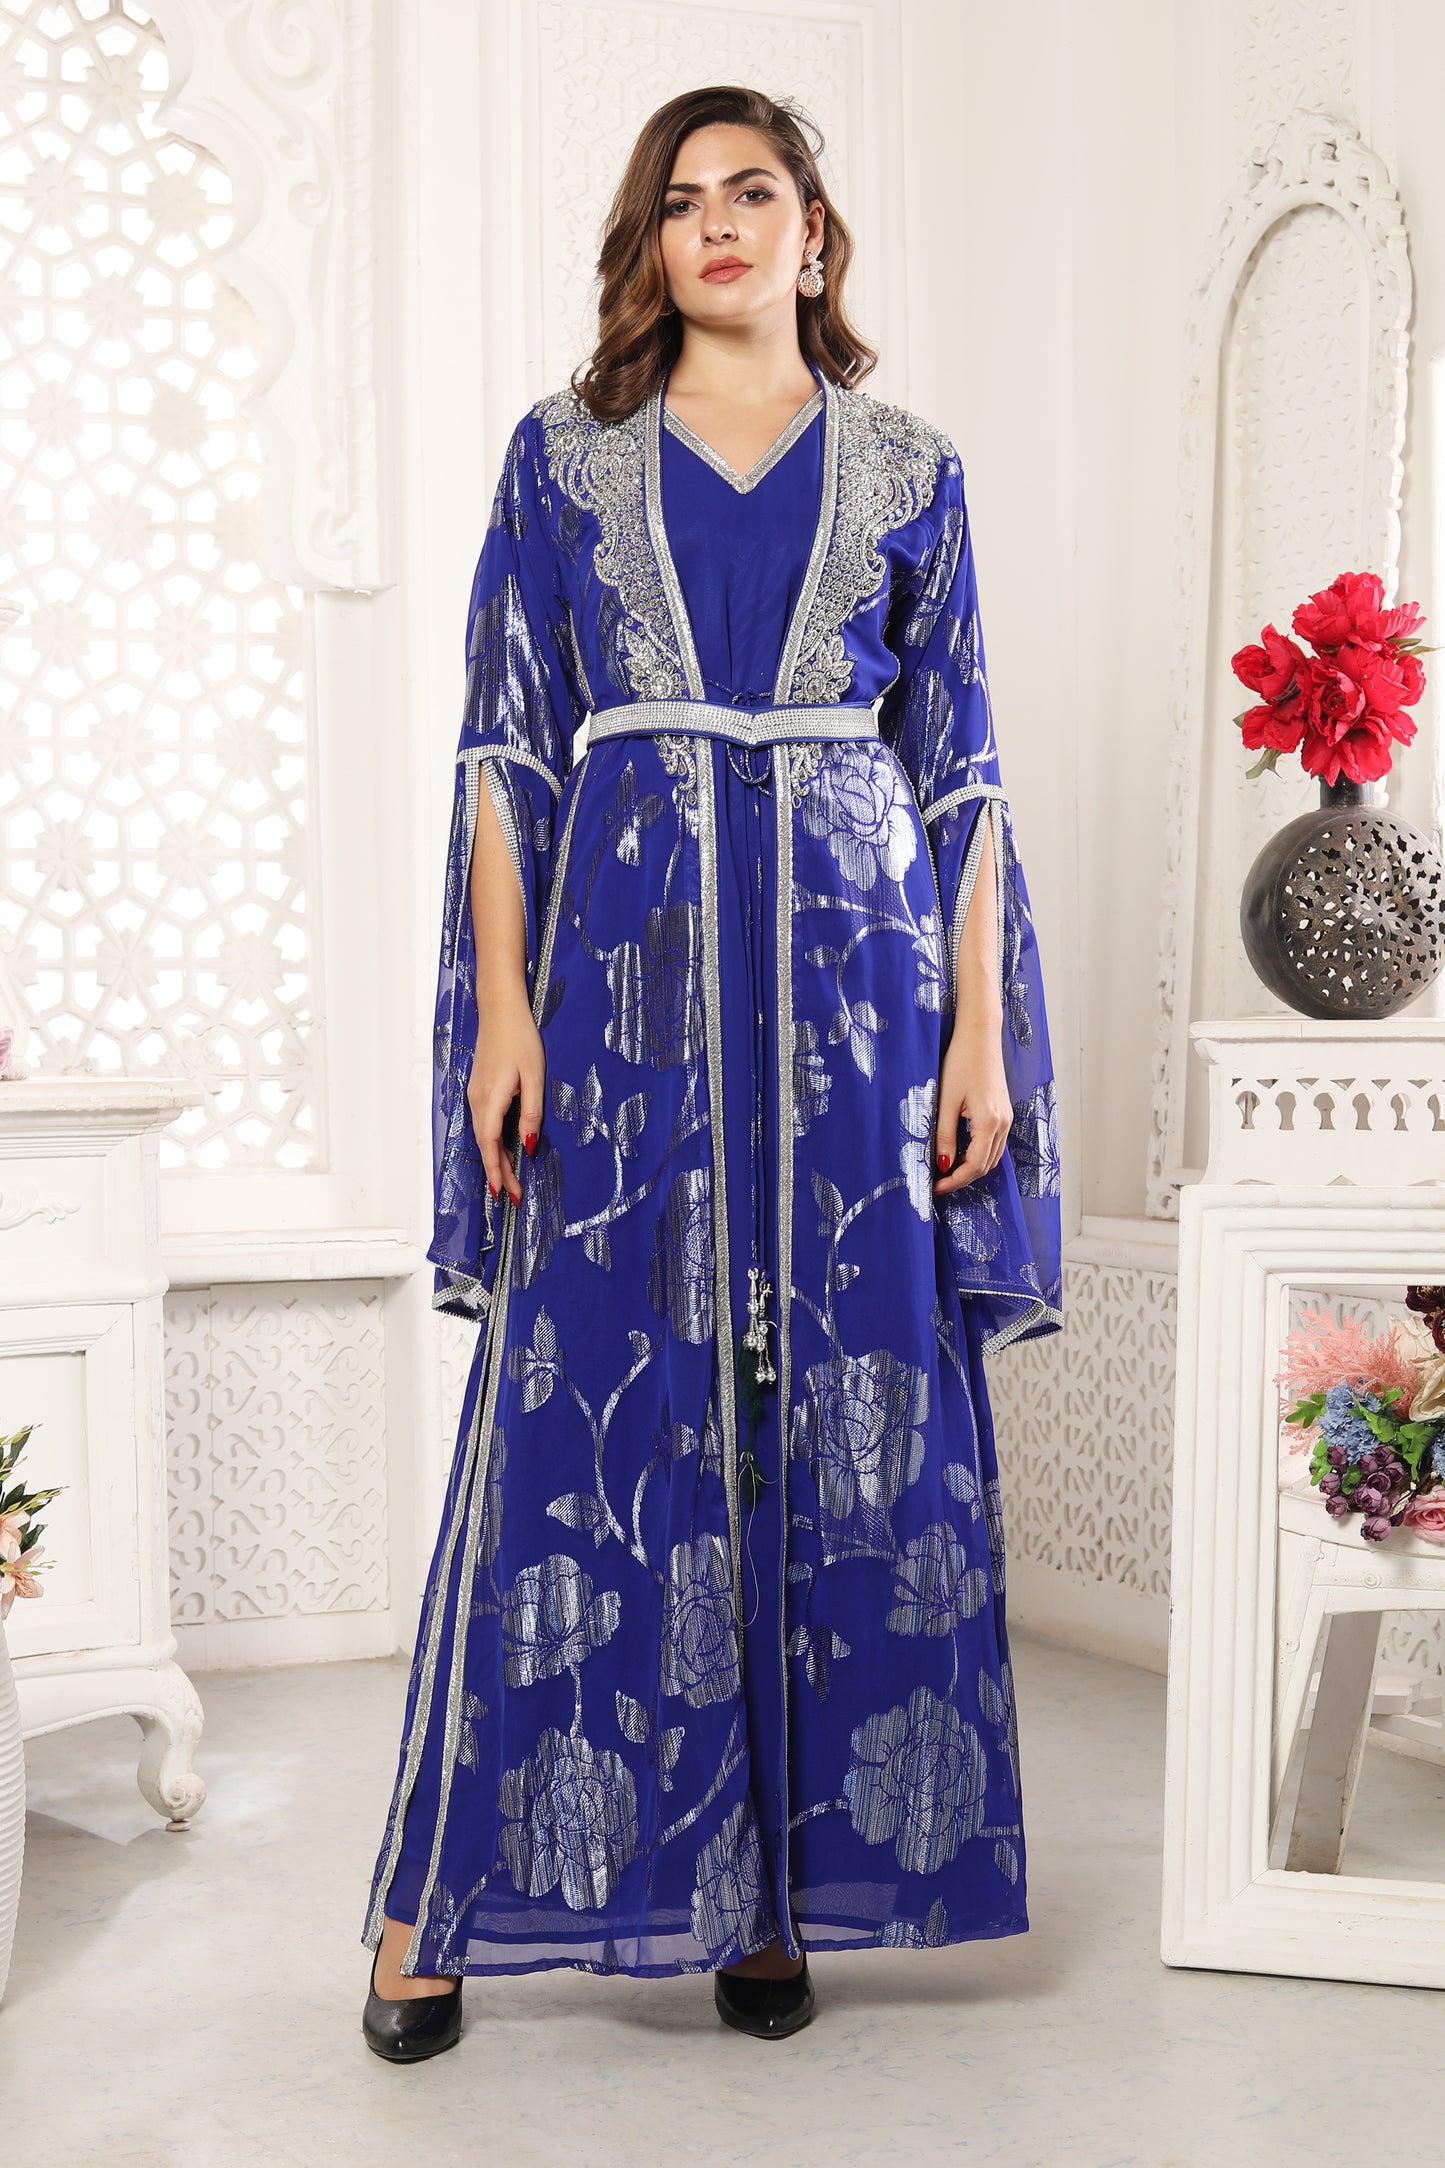 Embroidered Gowns In Vasai, Maharashtra At Best Price | Embroidered Gowns  Manufacturers, Suppliers In Vasai